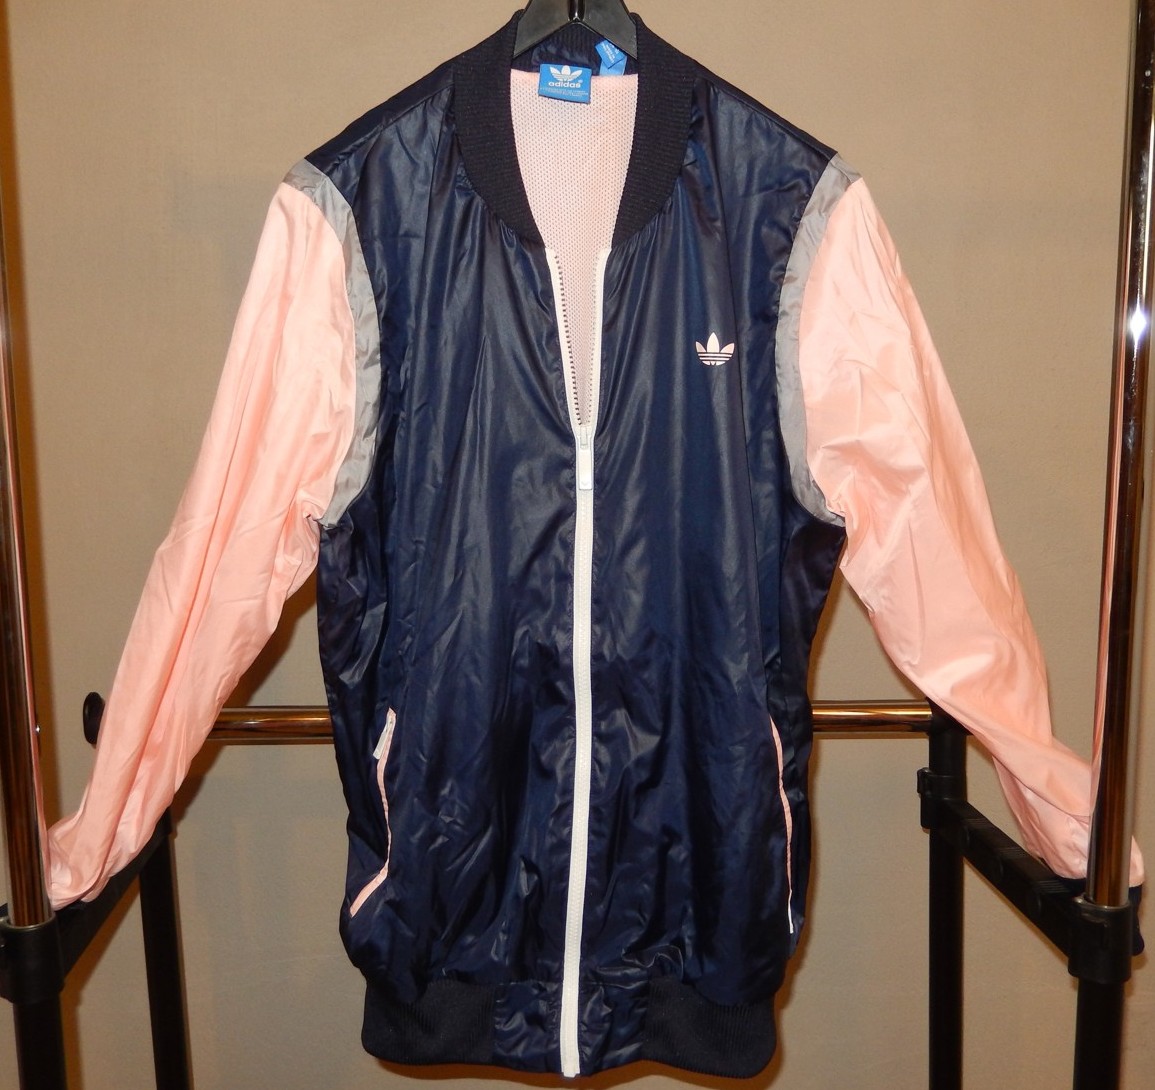 Adidas Track Top "Archiv". From March 2013